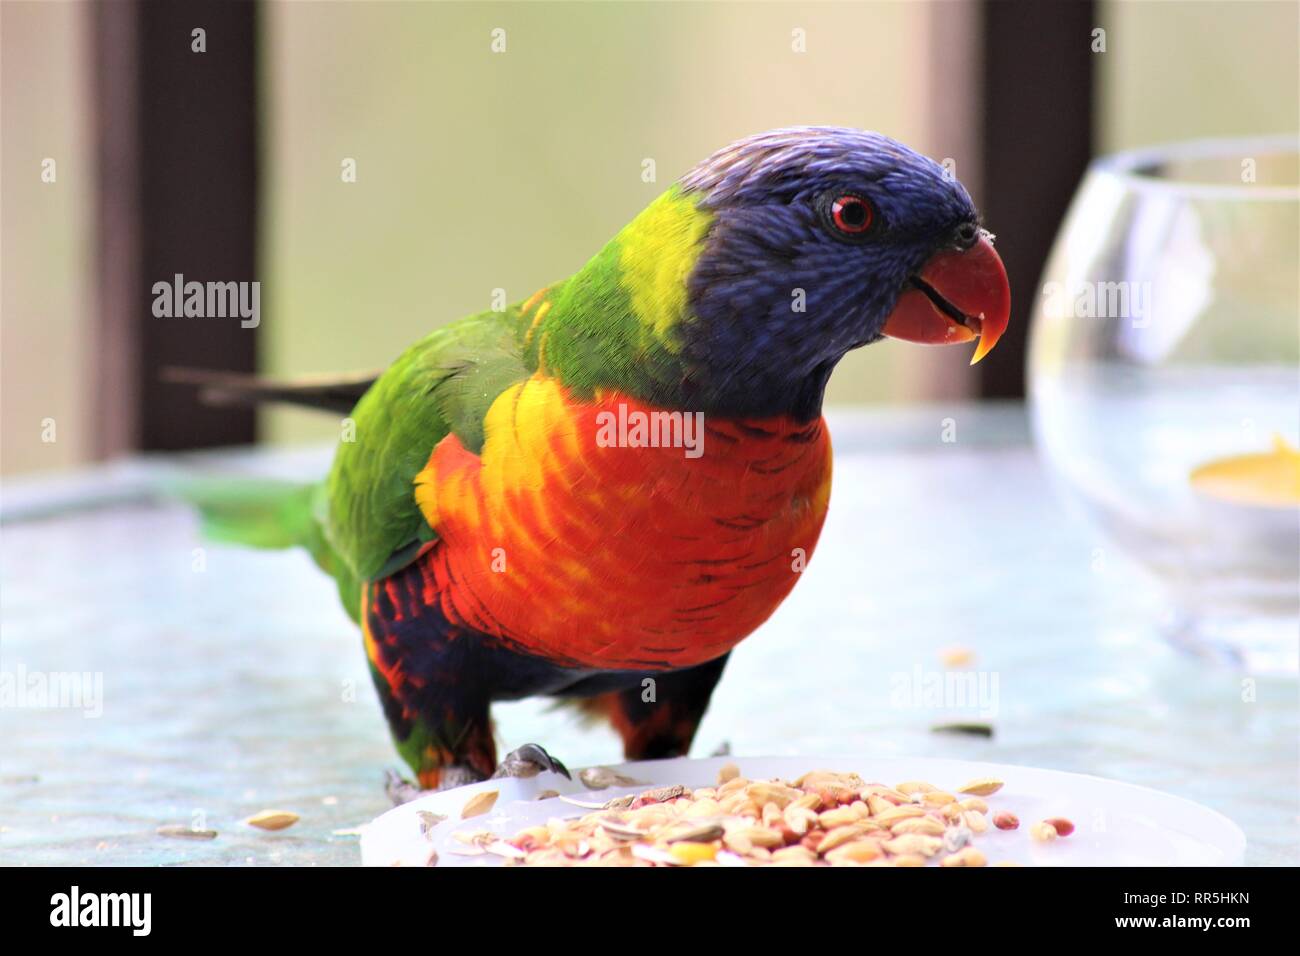 Cute exotic colorful lorikeet eating seeds, sitting on a table Stock Photo